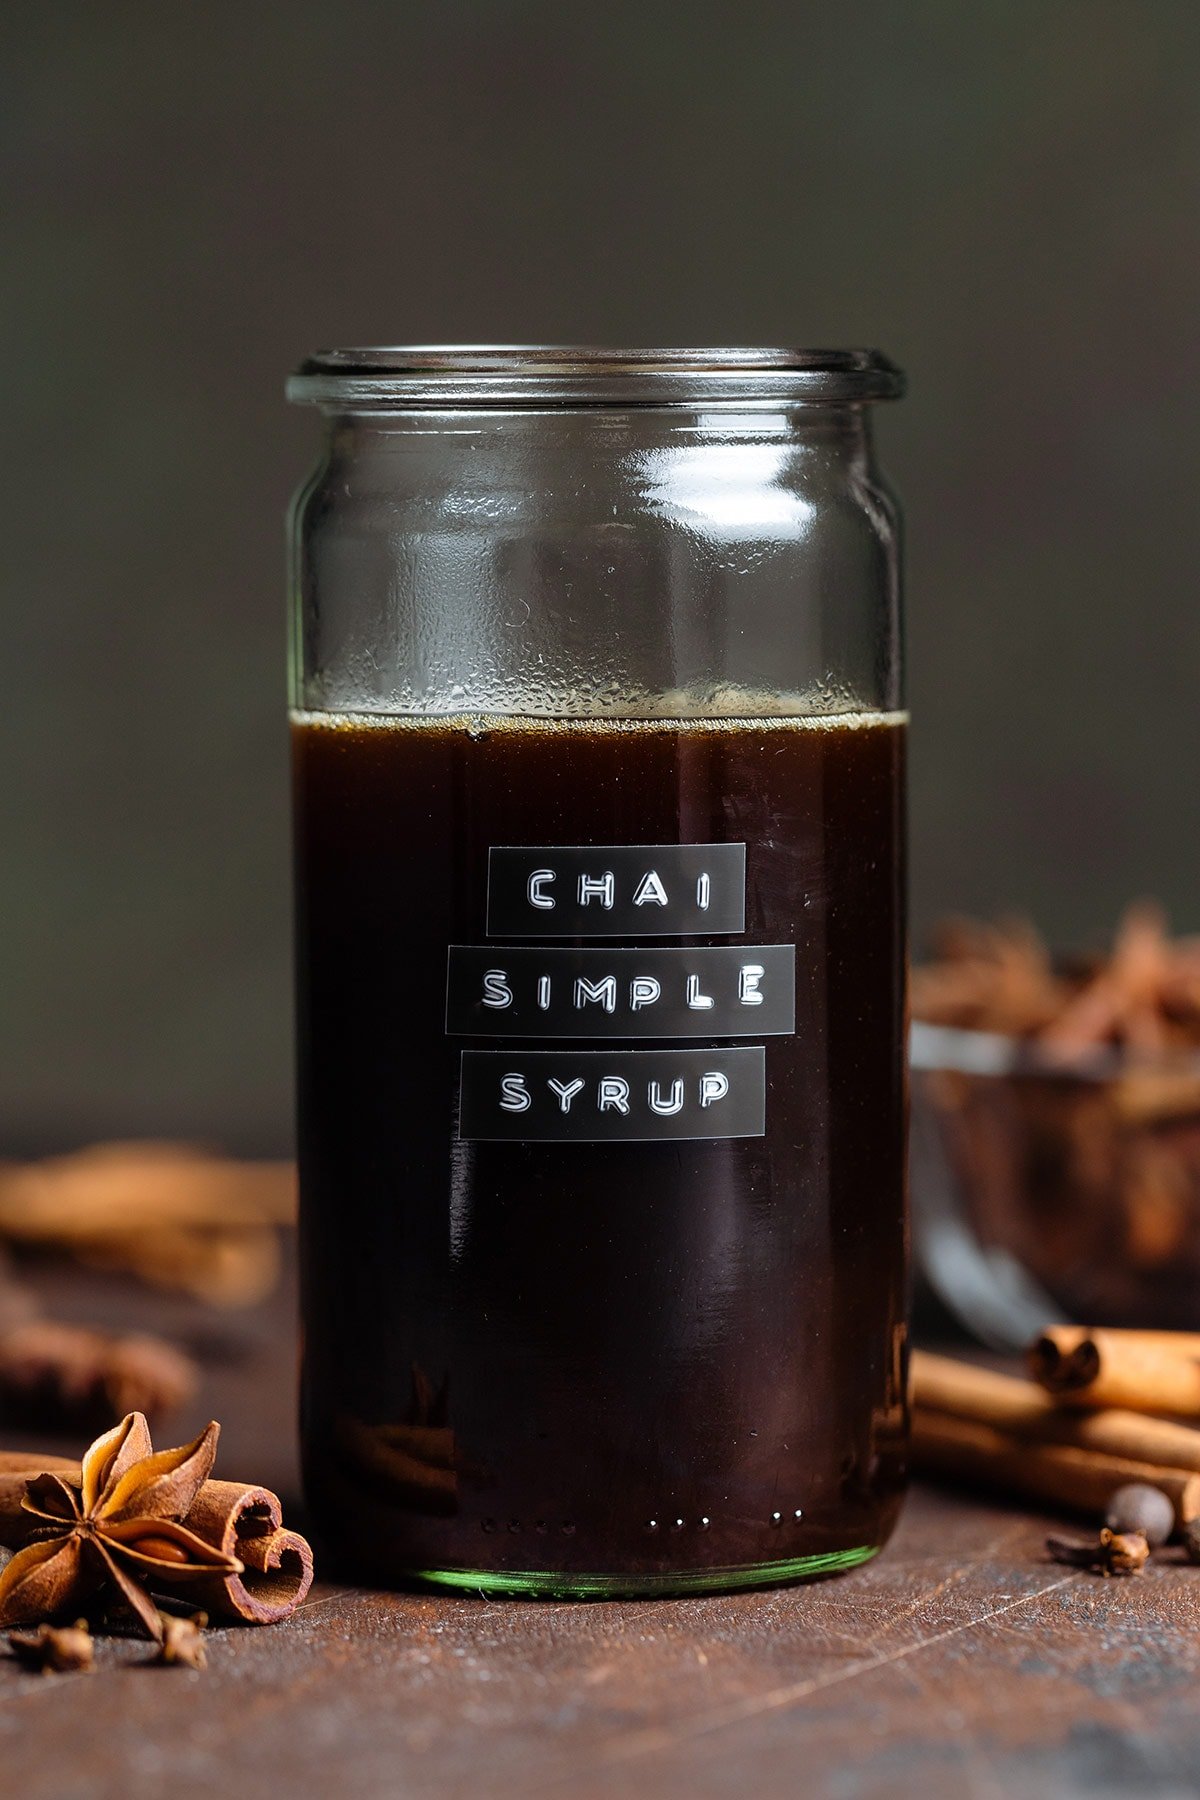 Dark syrup in a glass jar with a glass lid and an embossed label that say chai simple syrup.